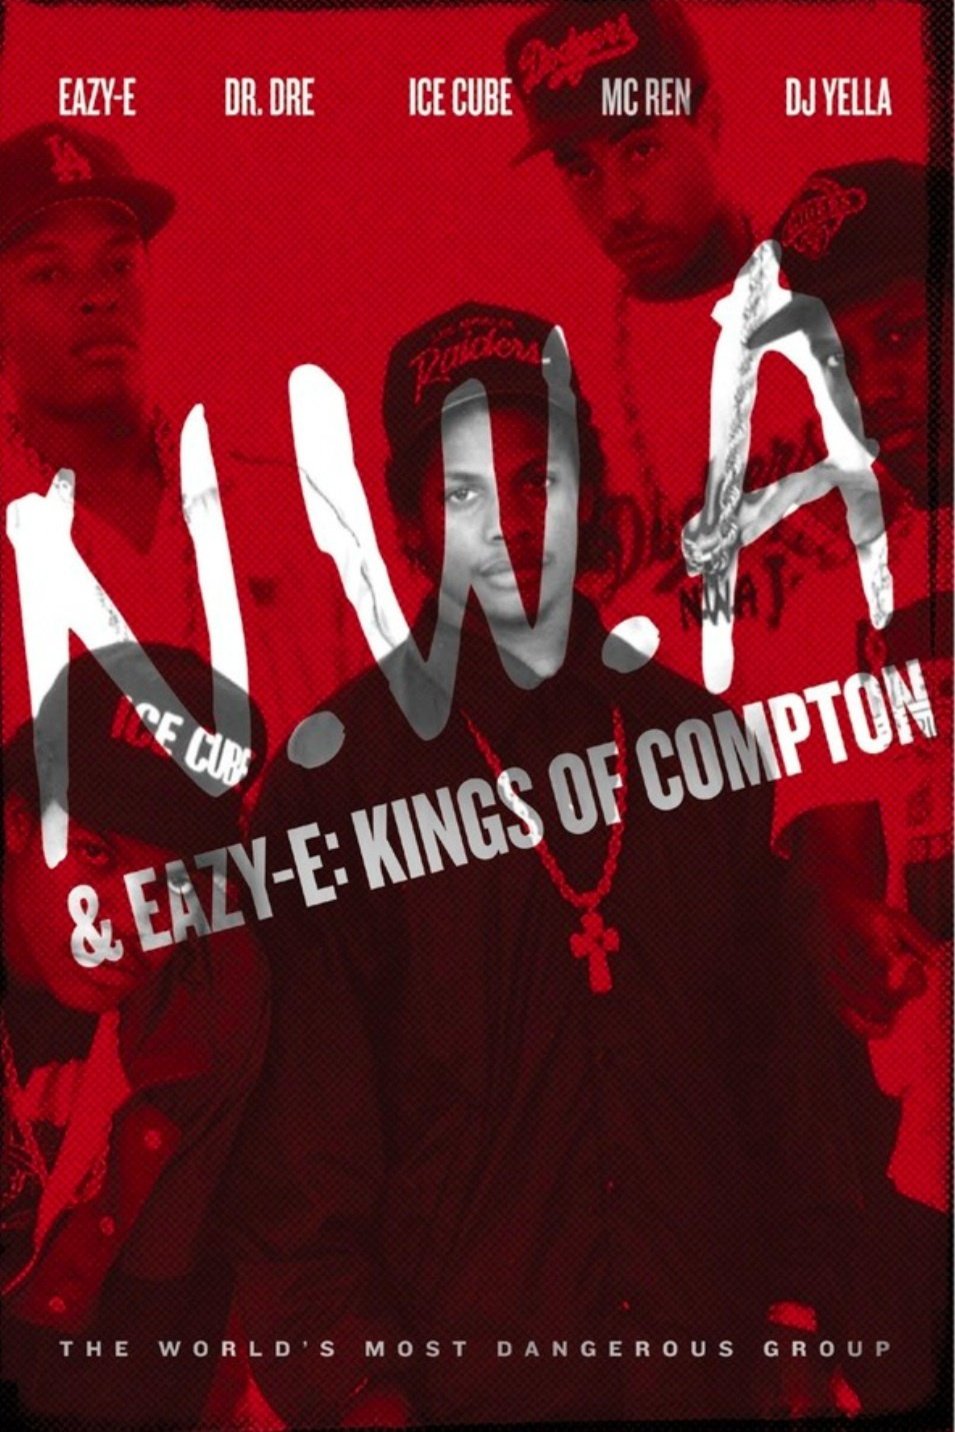 Poster of the movie NWA & Eazy-E: Kings of Compton